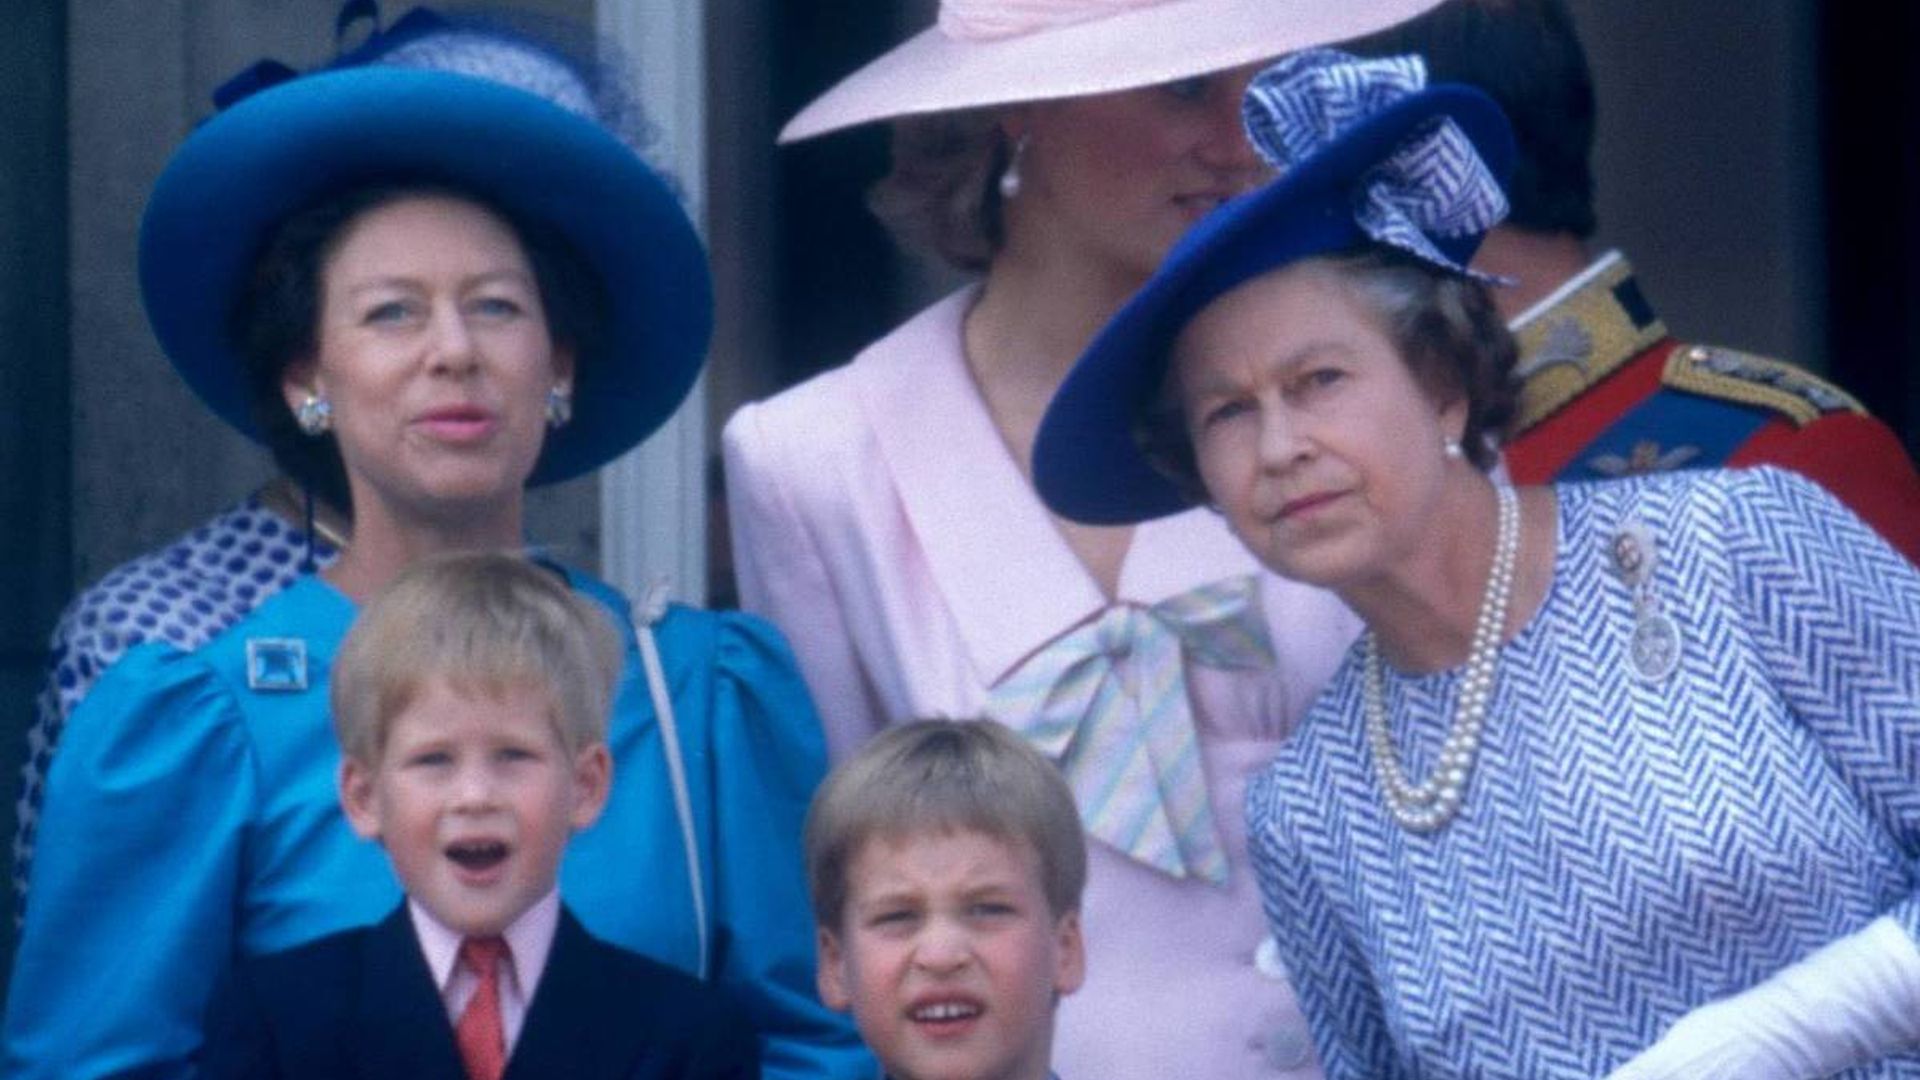 The Queen and Princess Margaret - the big difference between their grandchildren